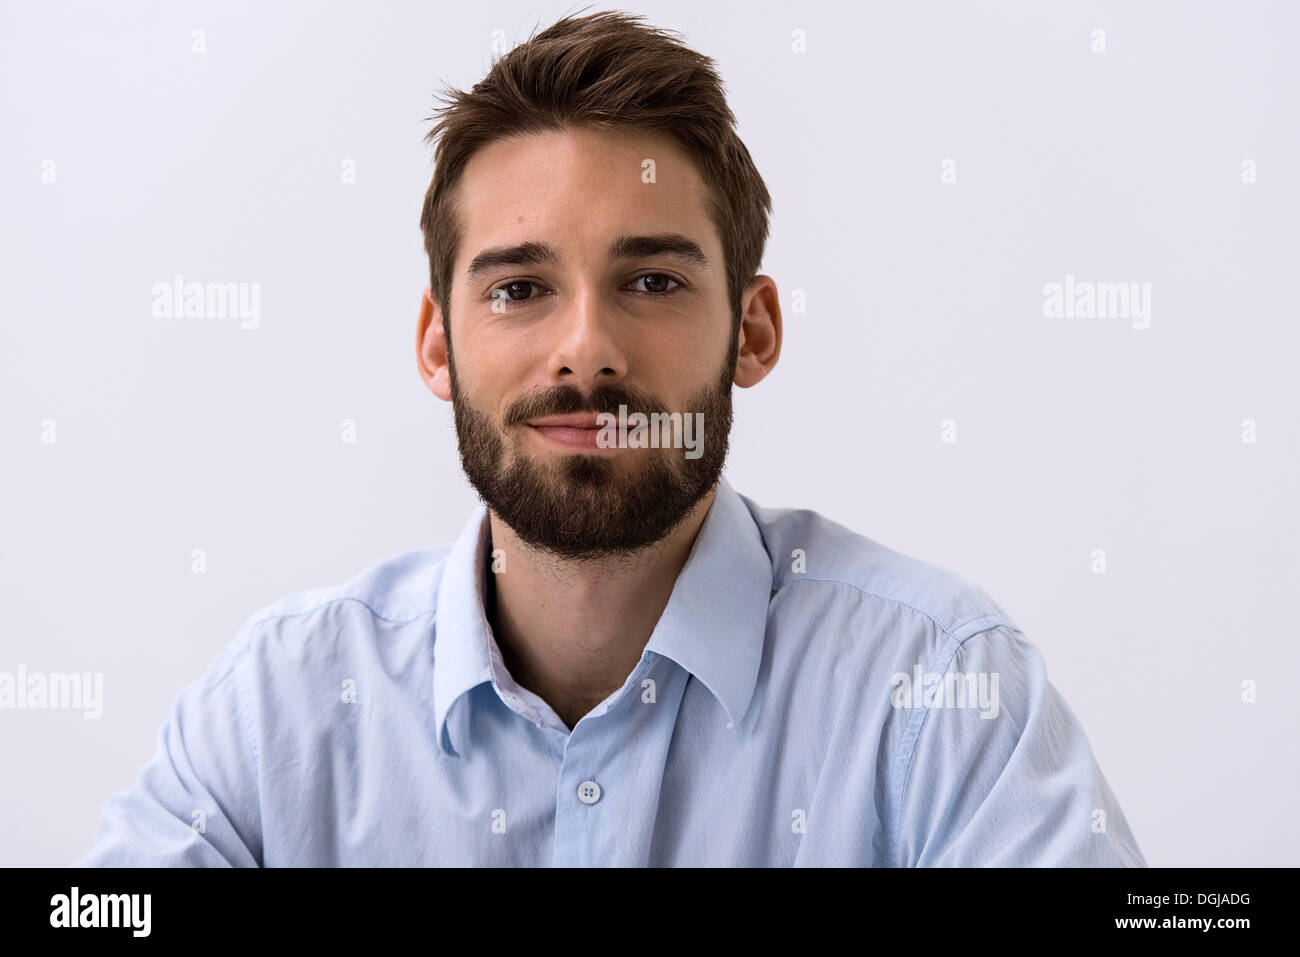 Close up portrait of young man in blue shirt Stock Photo